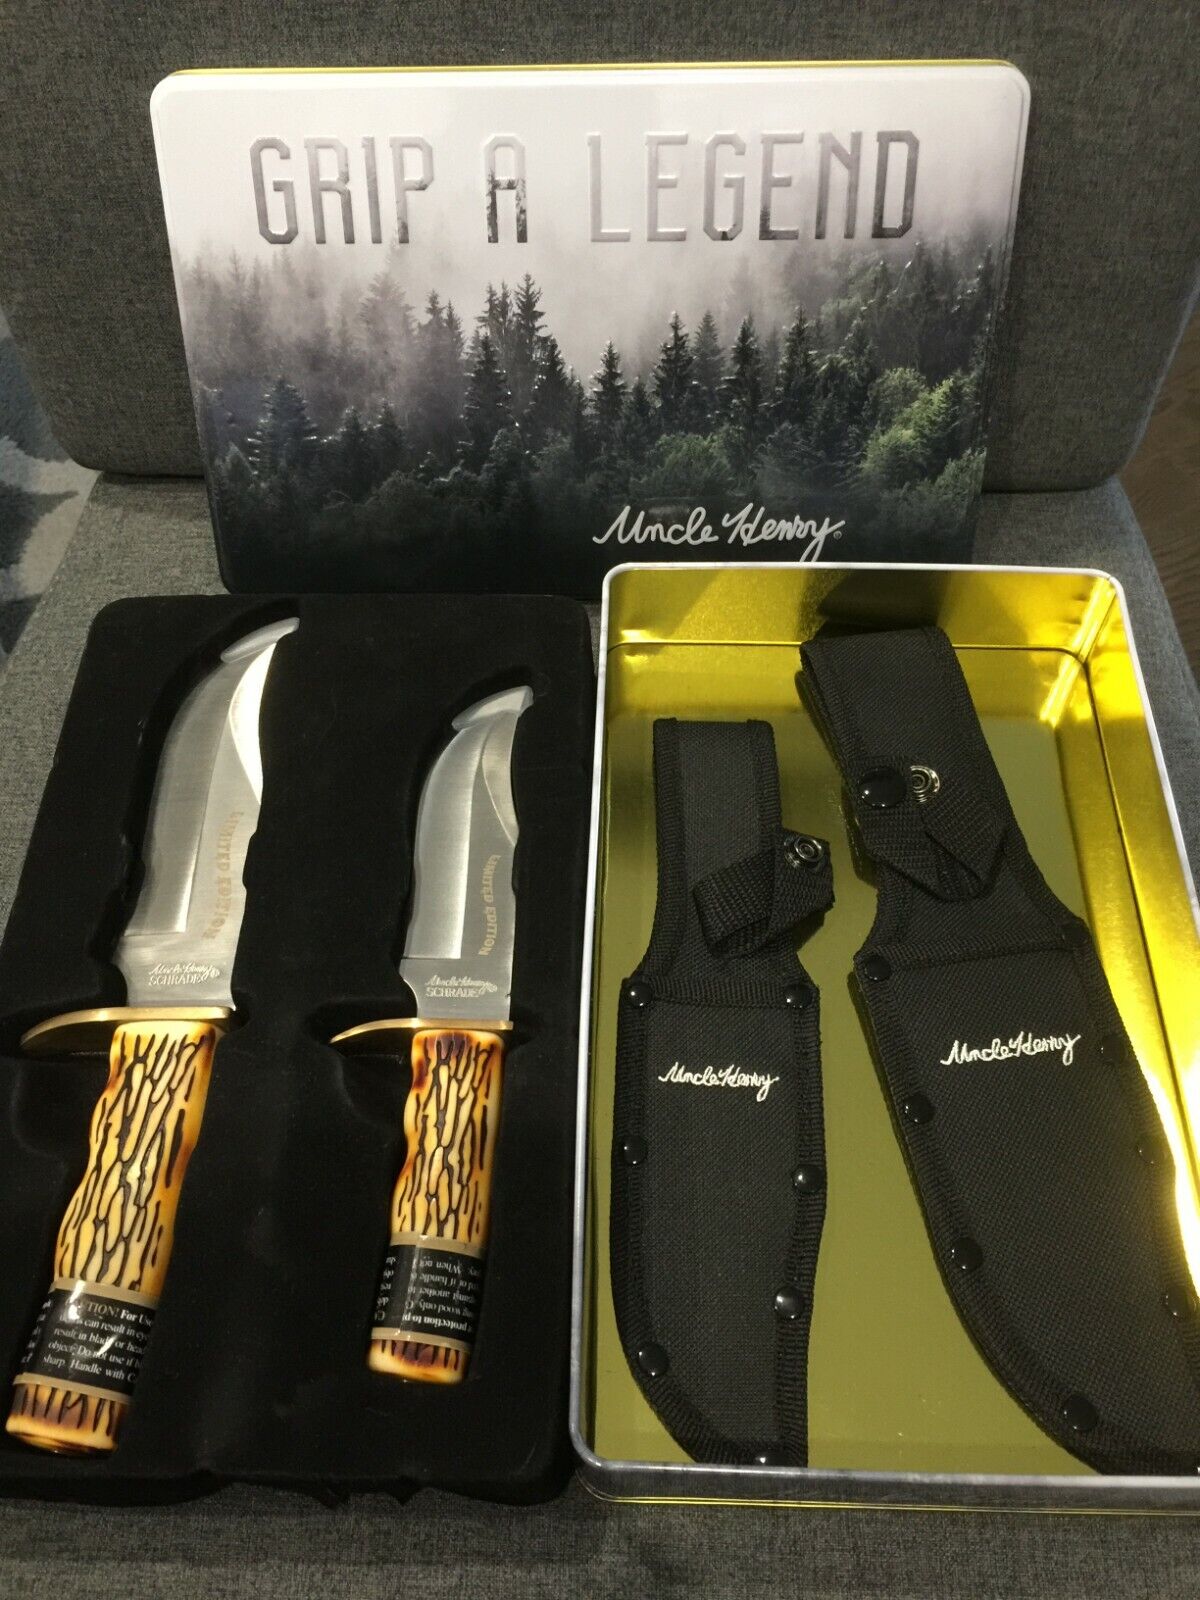 SCHRADE UNCLE HENRY LIMITED EDITION 2 pc Knife Knives Set GRIP A LEGEND